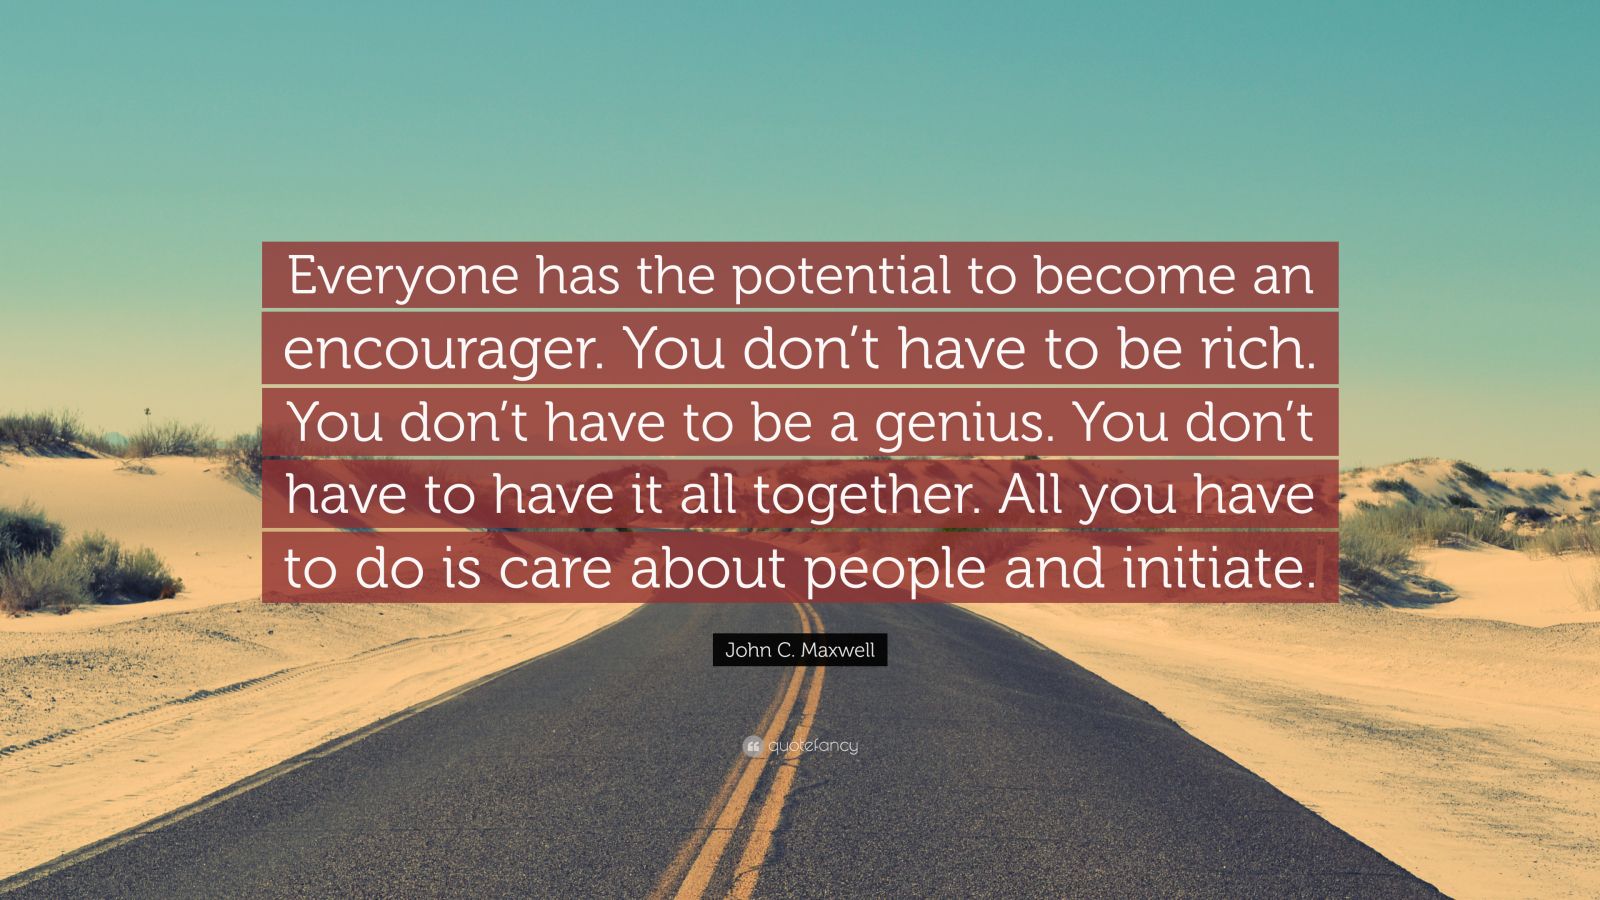 John C. Maxwell Quote: “Everyone has the potential to become an ...